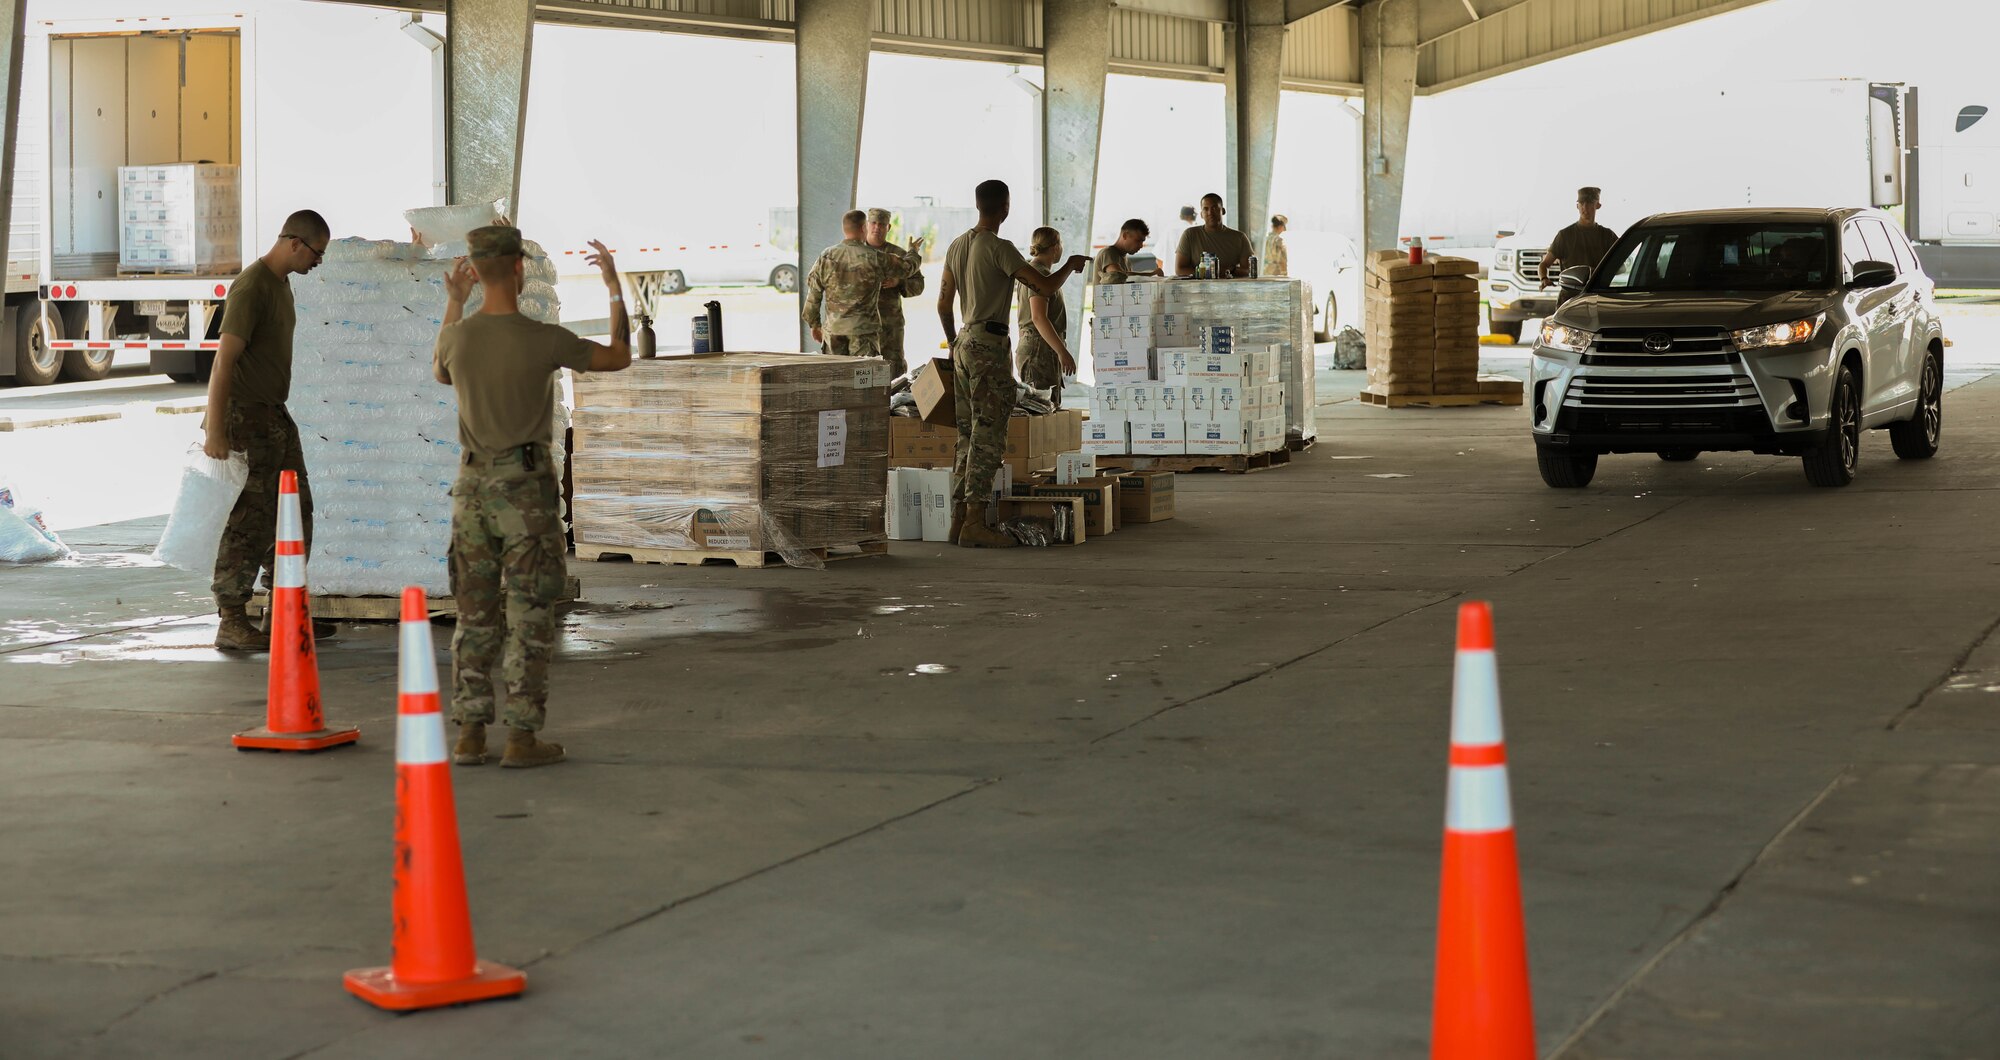 Members of the Oklahoma Army National Guard operate a point of distribution site in Donaldsonville, Louisiana, Sept. 4. The Oklahoma National Guard operates 13 PODs across seven parishes that supply local families with tarps, meals ready to eat, ice and water. (Oklahoma National Guard photo by Cpl. Reece Heck)